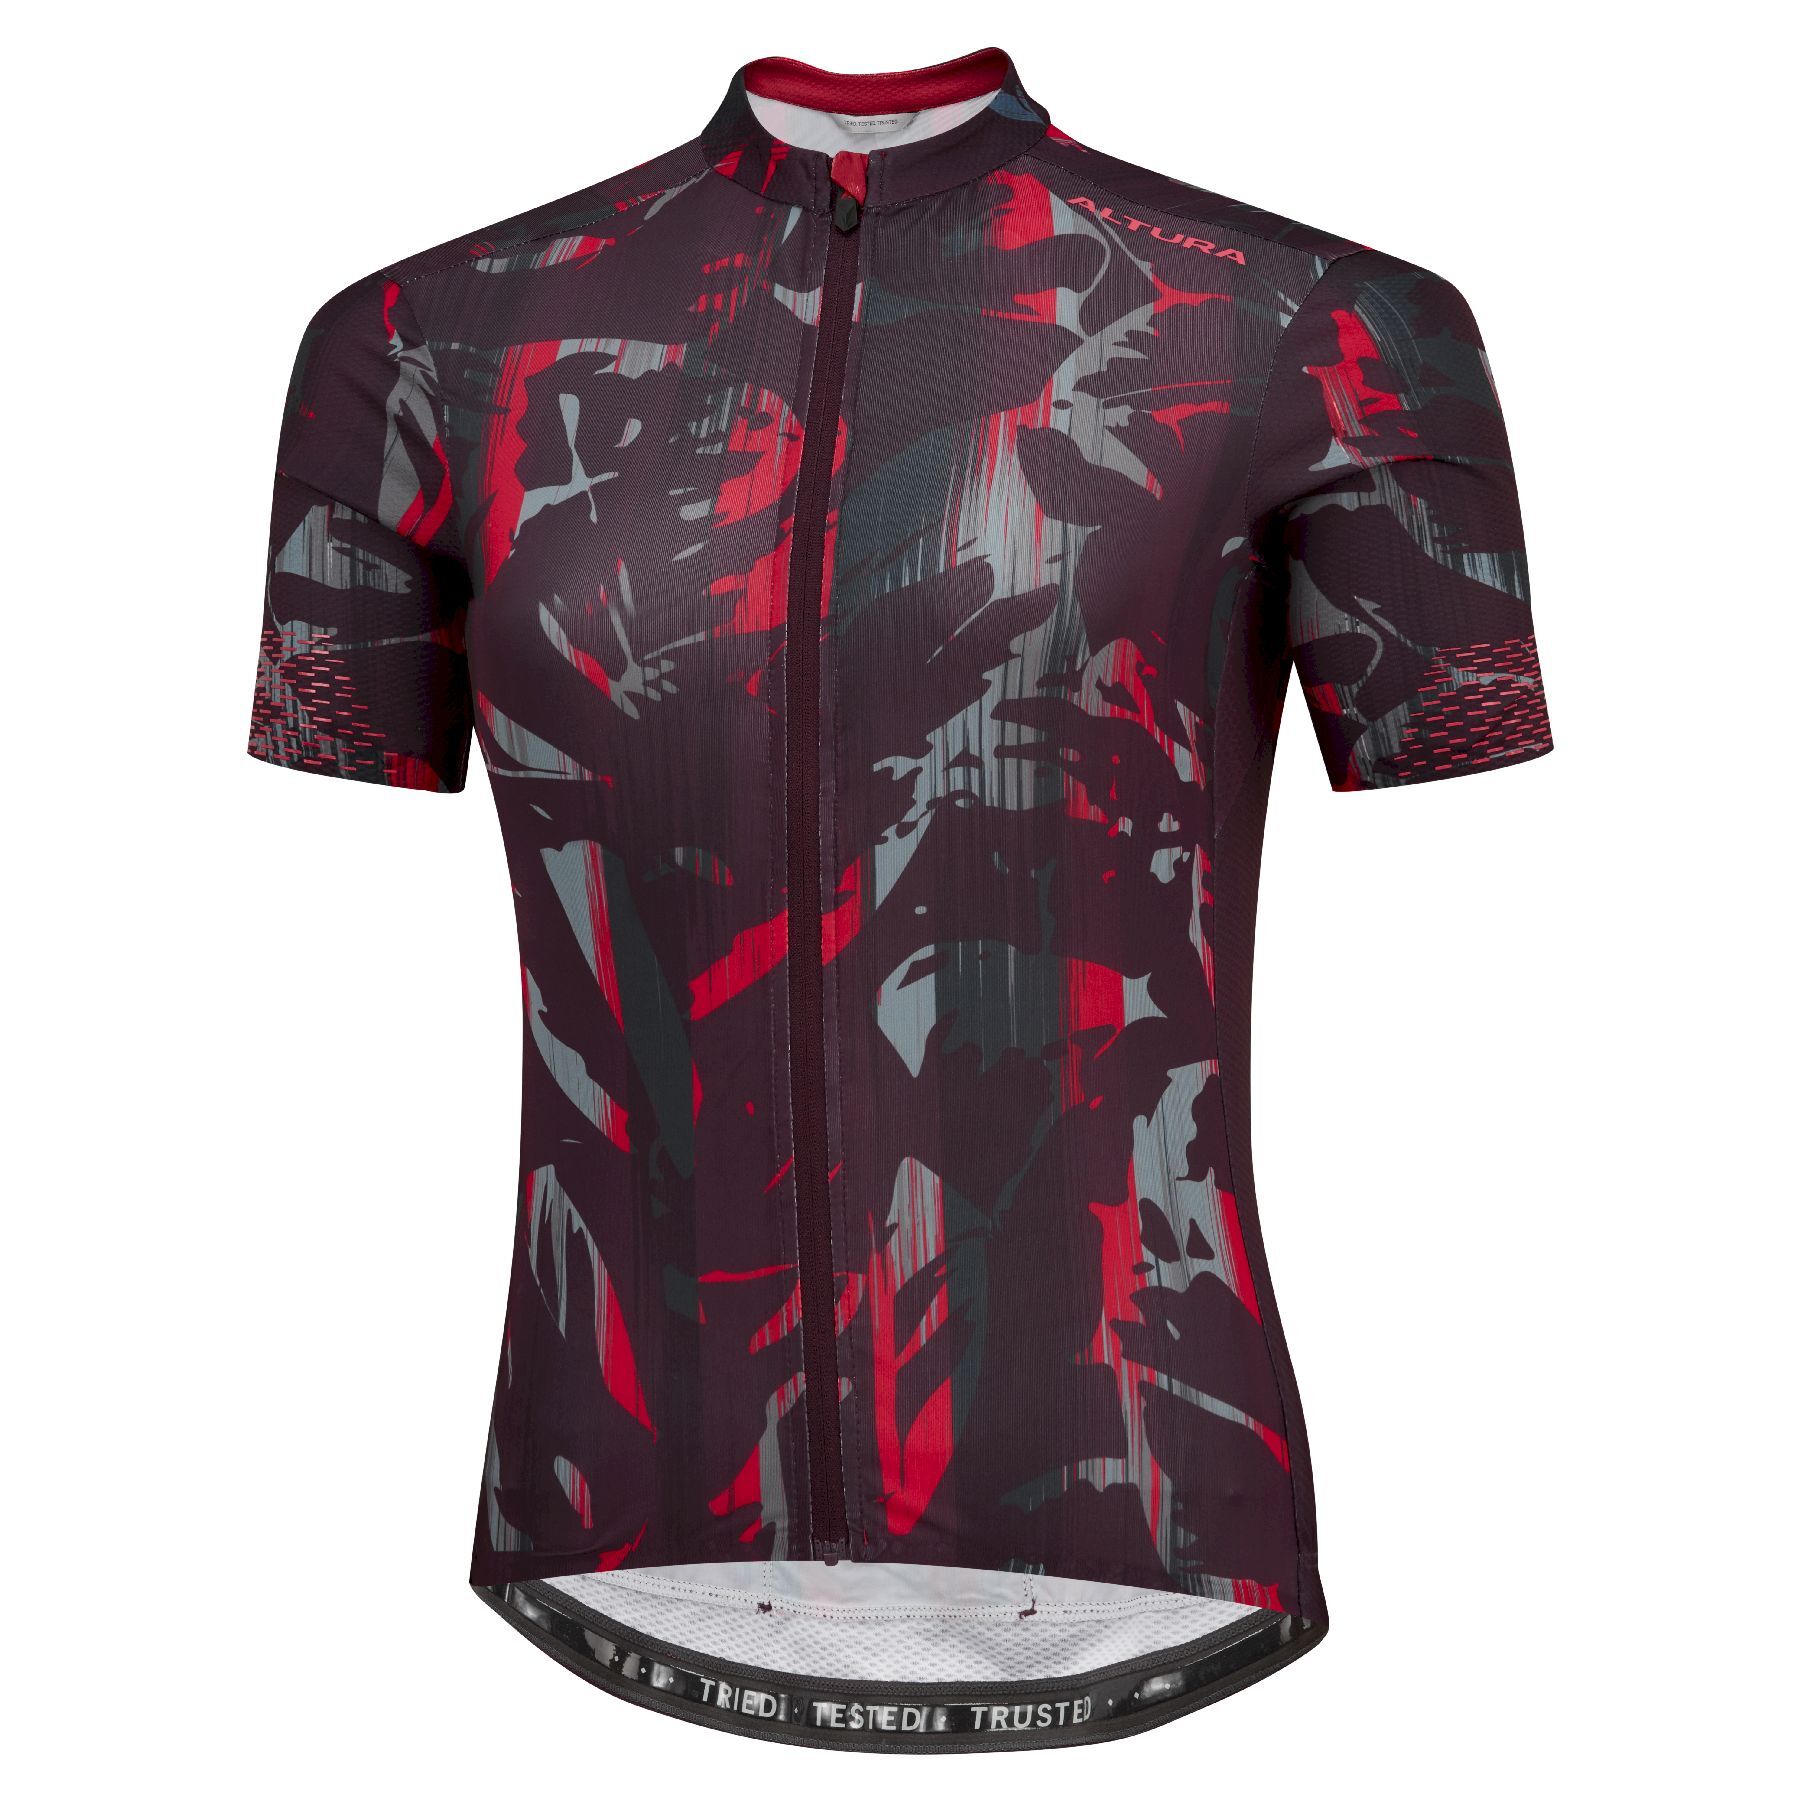 Altura Icon - Cycling jersey - Women's